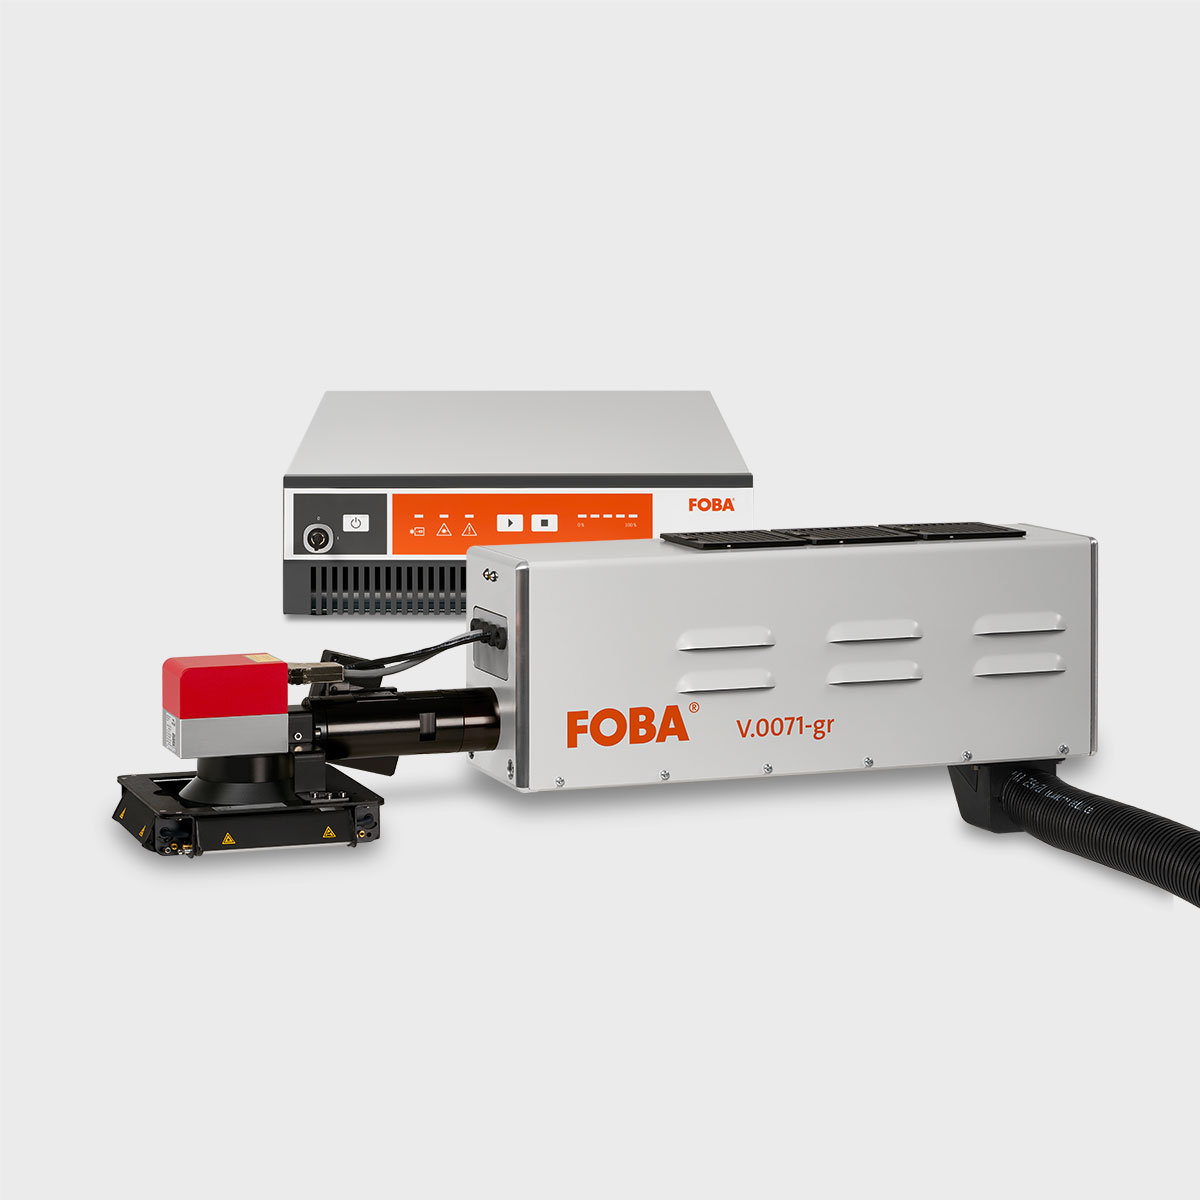 FOBA V.0071-gr 7-watt laser marking system is classified laser protection class 4 and must be equipped with a housing or integrated into a marking unit